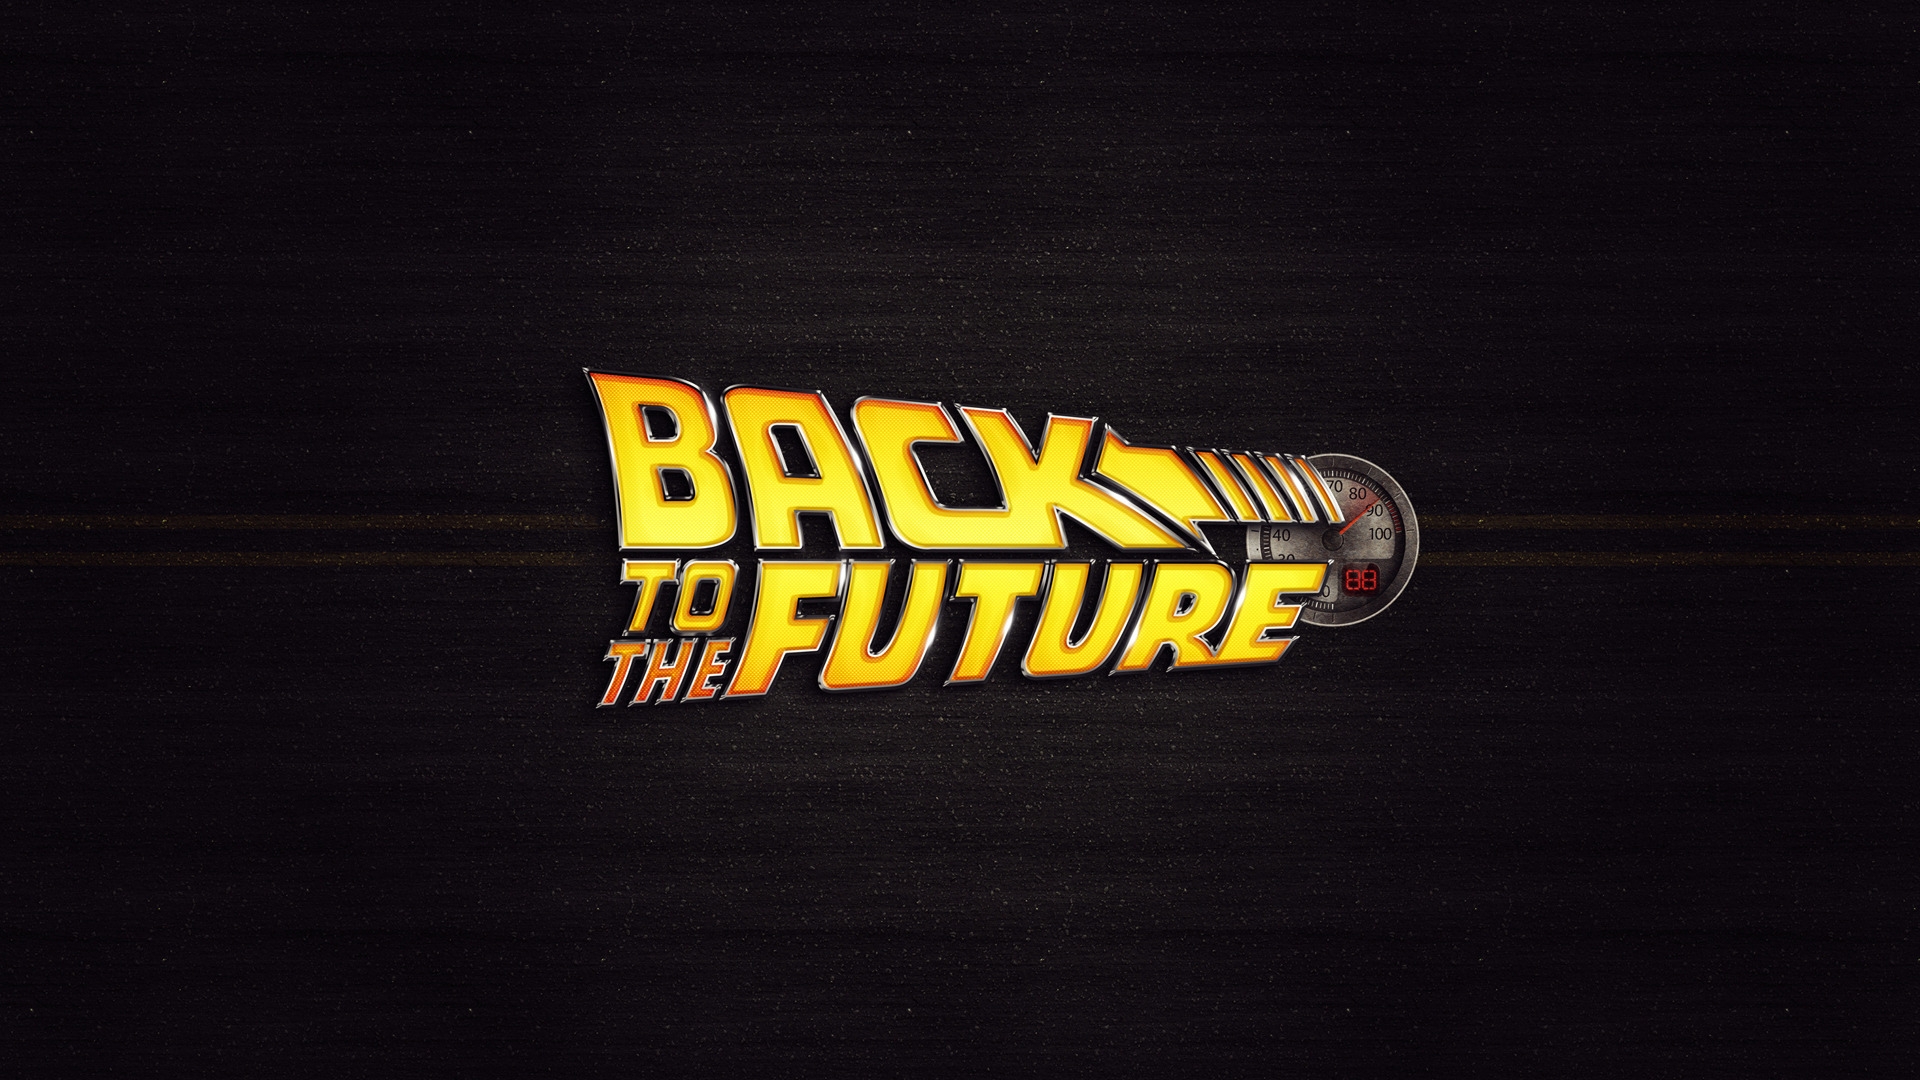 Back to the Future for 1920 x 1080 HDTV 1080p resolution